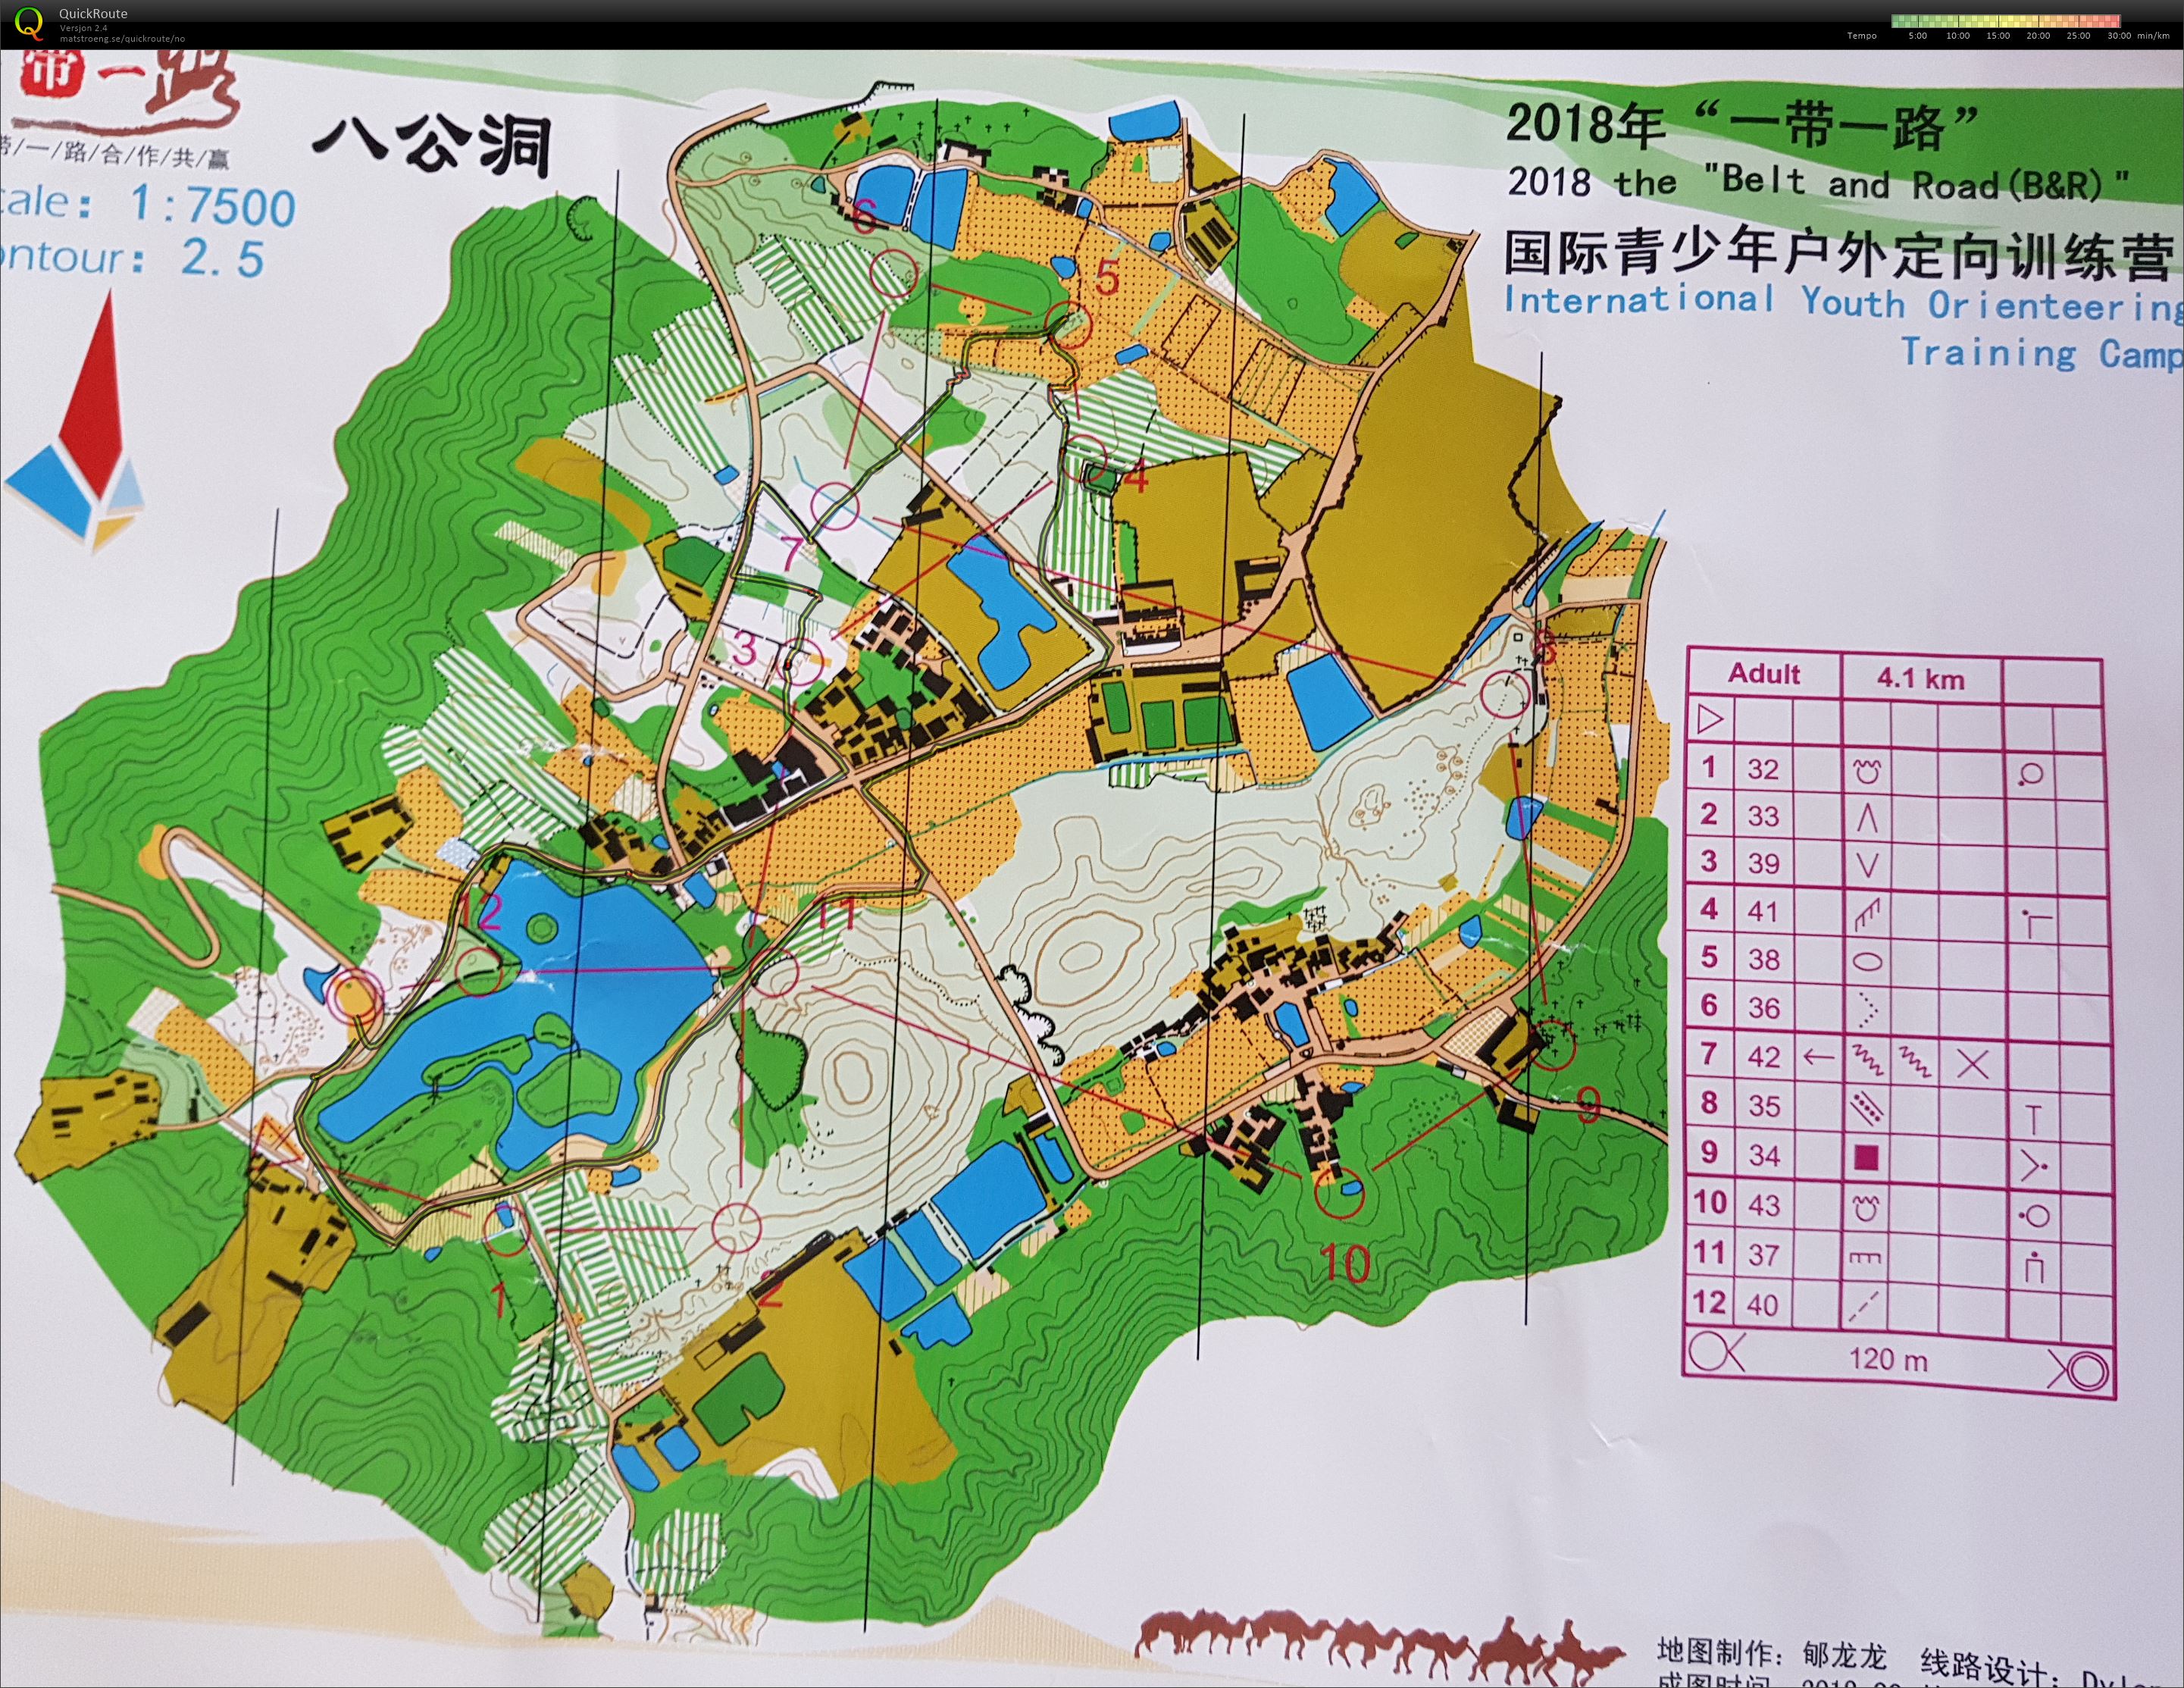 Belt and Road International Youth Orienteering Camp (28-10-2018)